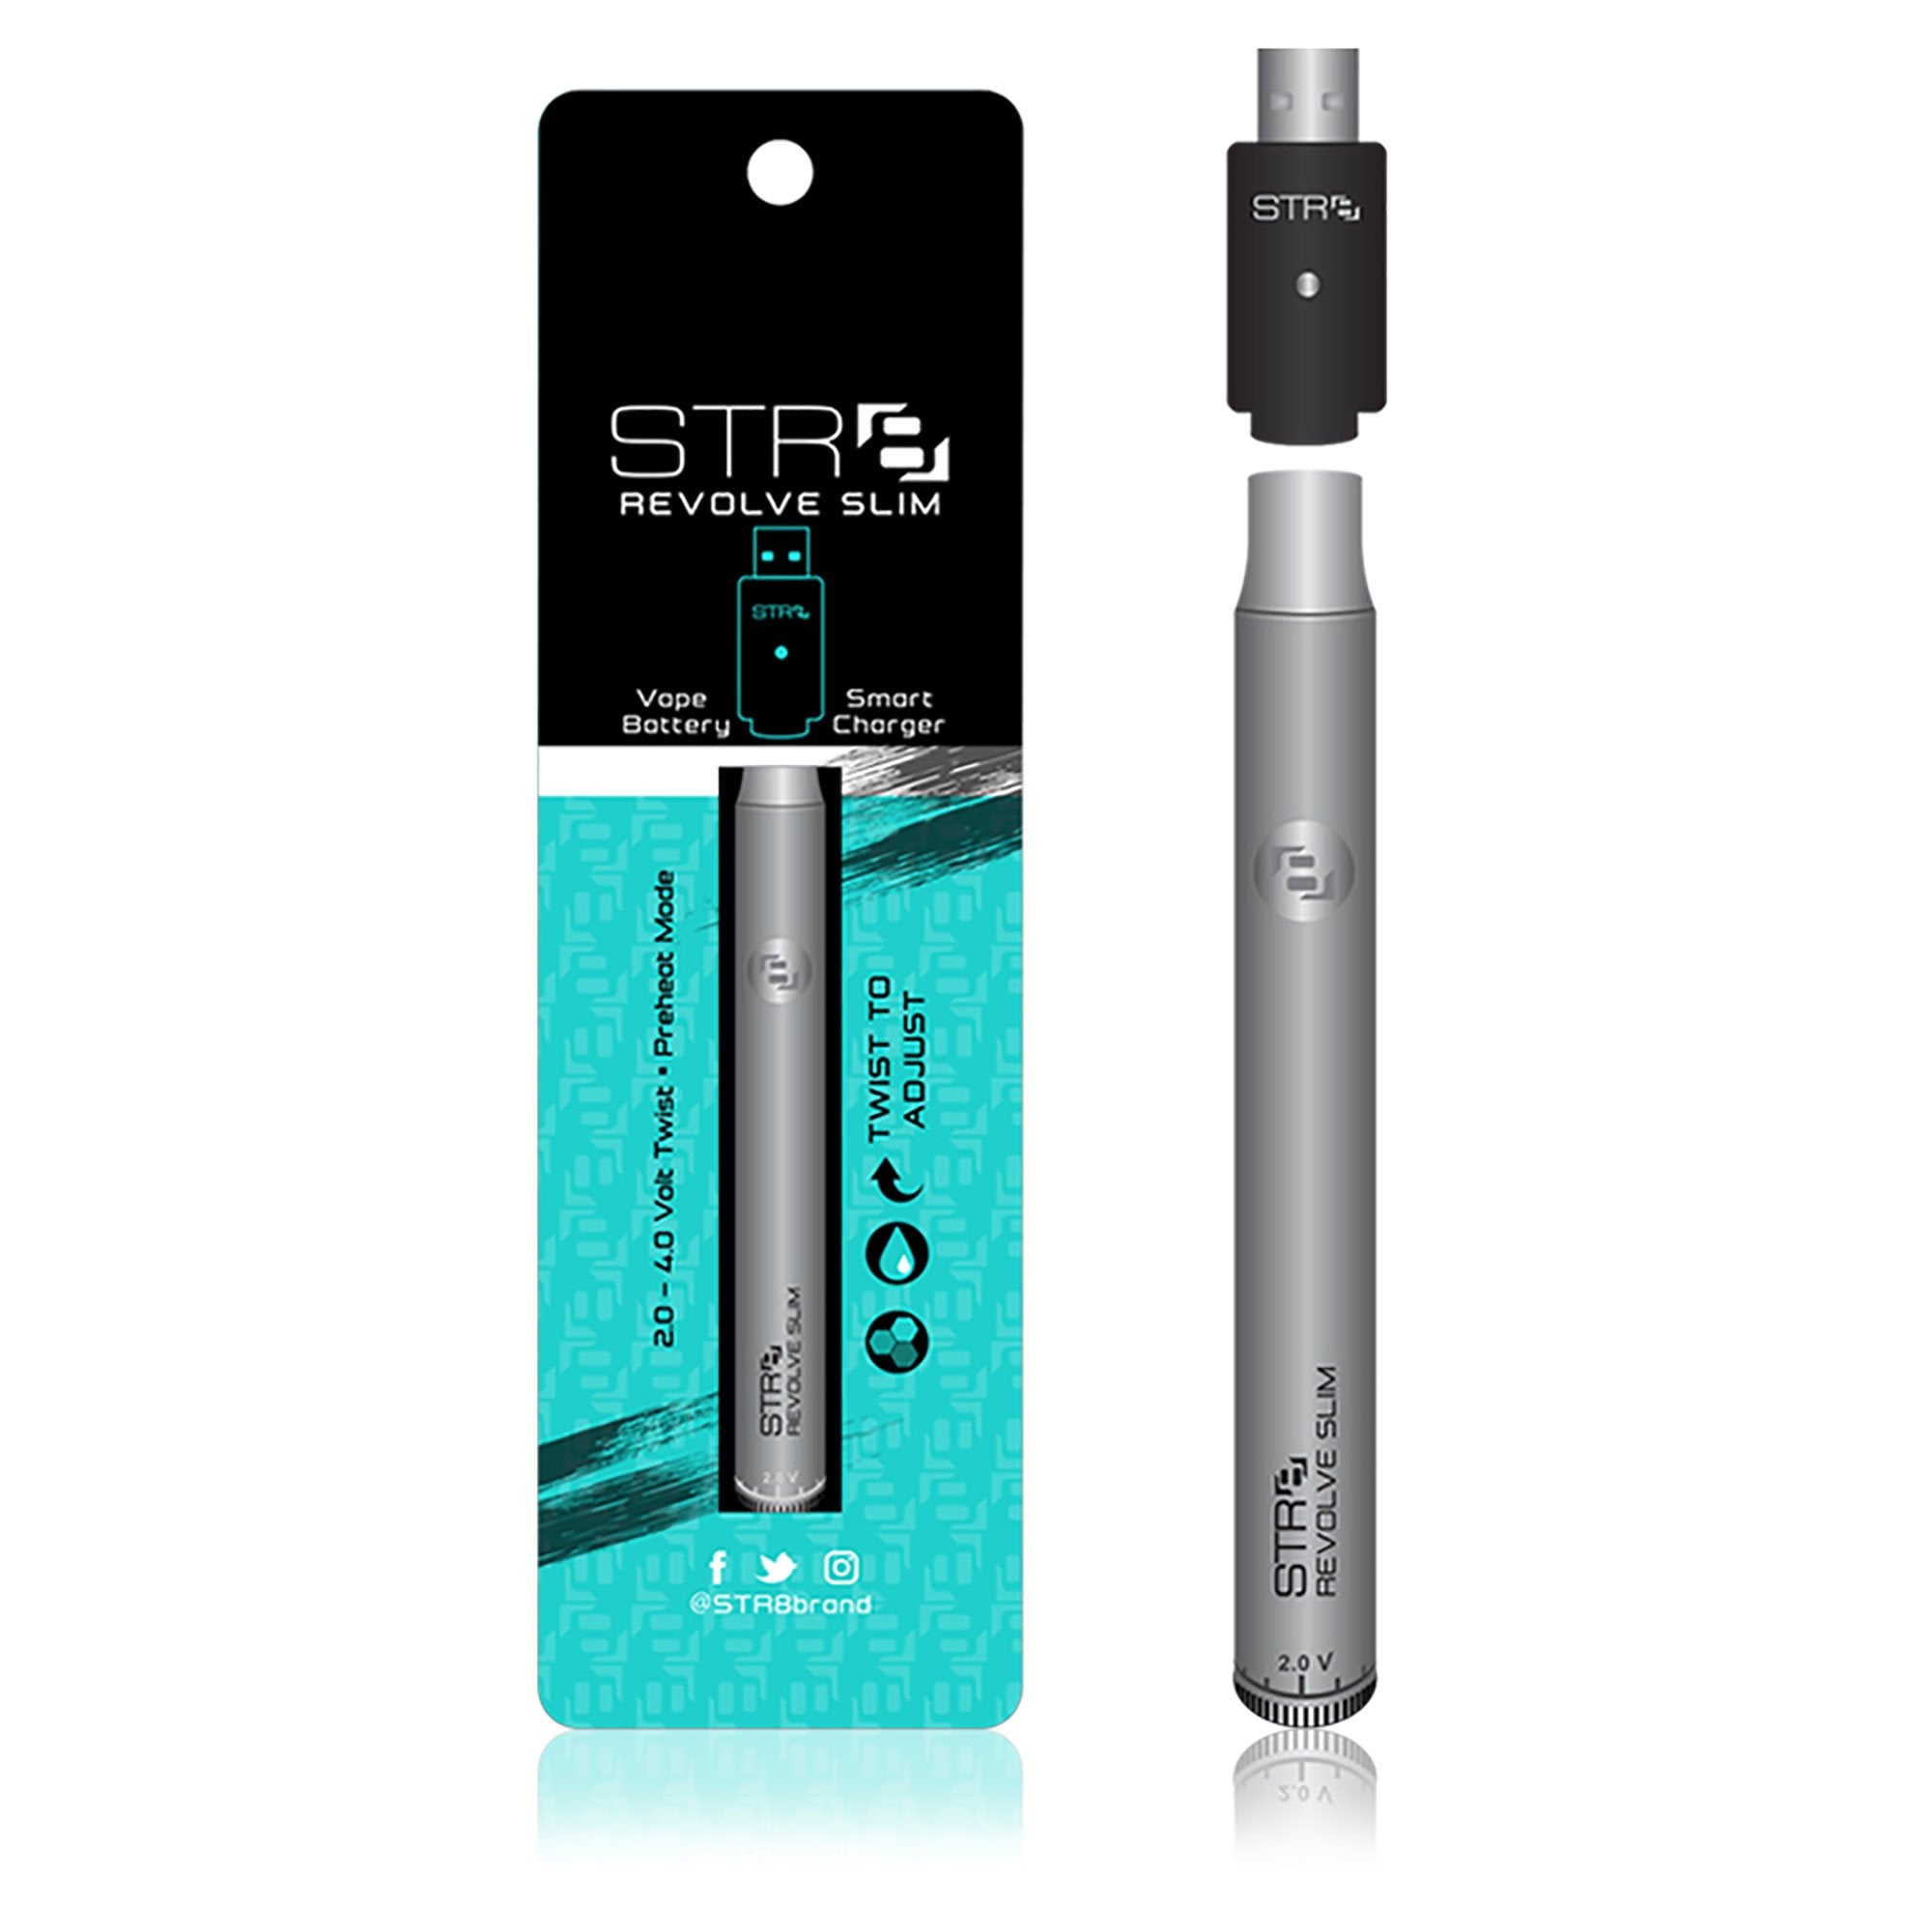 STR8 | Revolve Slim Vape Batteries with Charger | 320mAh - Silver - 10 Count - 1